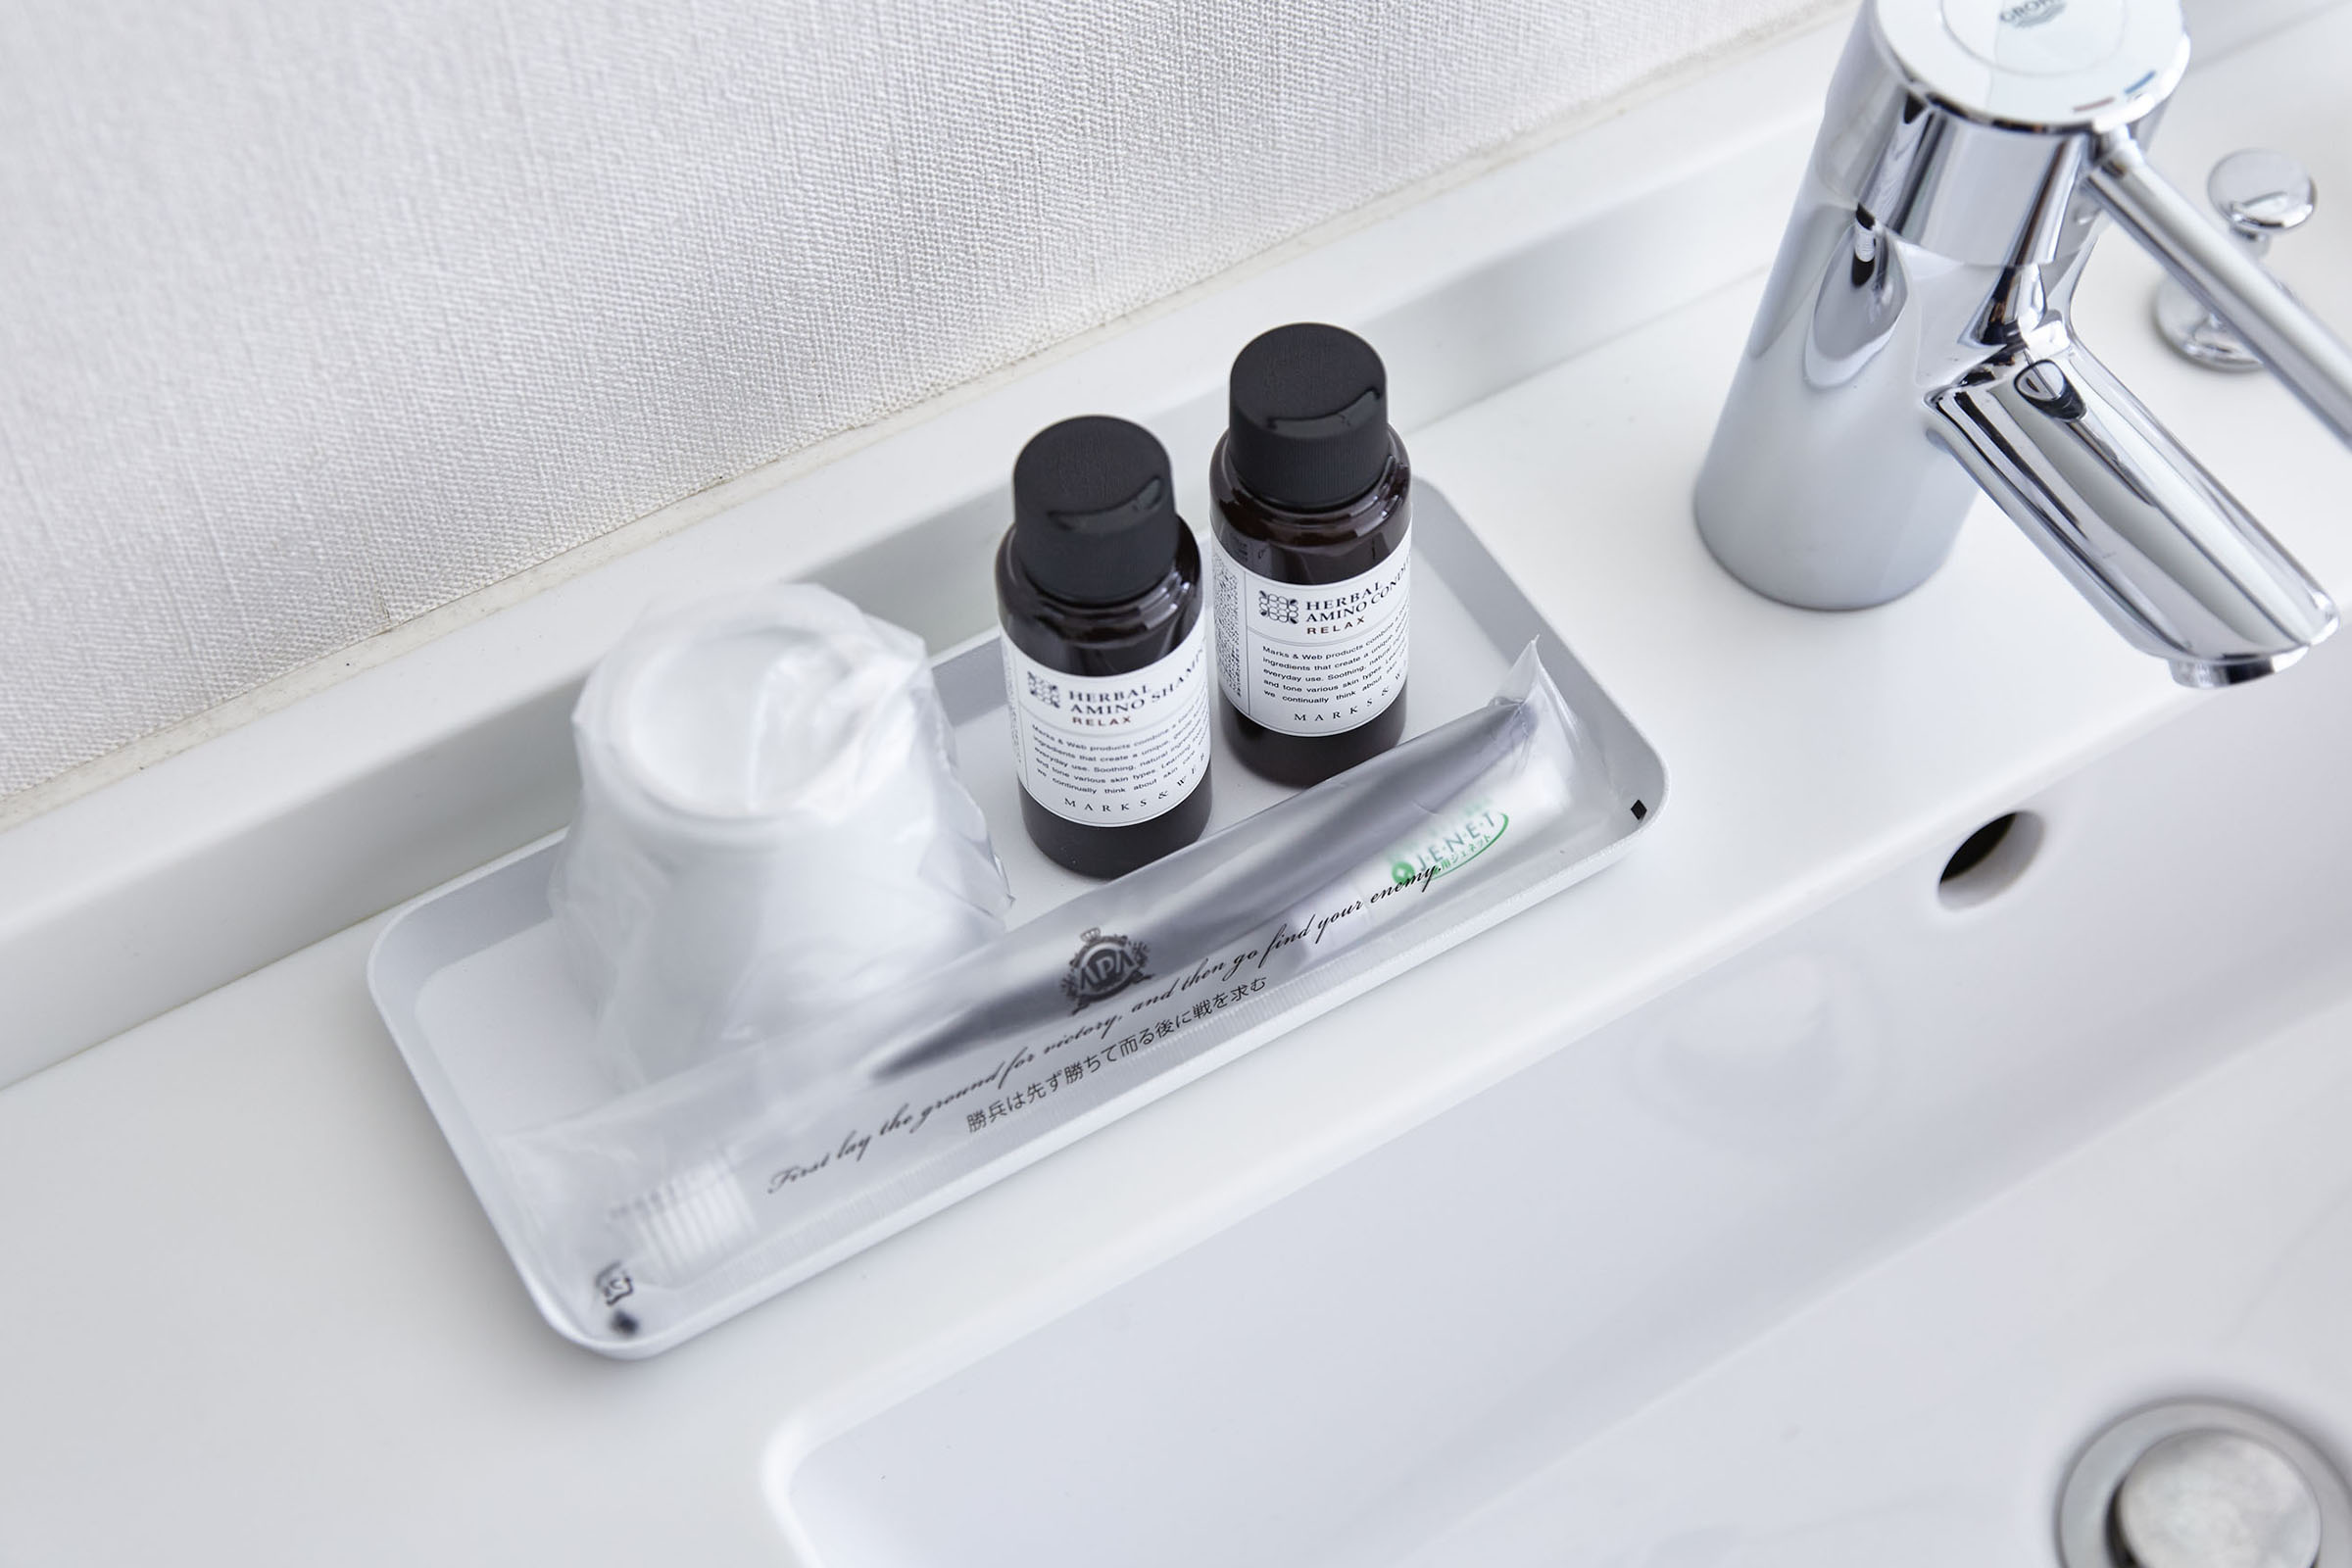 White Amenity Tray | Rectangular holding a toothbrush, a cup and shampoo bottles next to a faucet on white sink